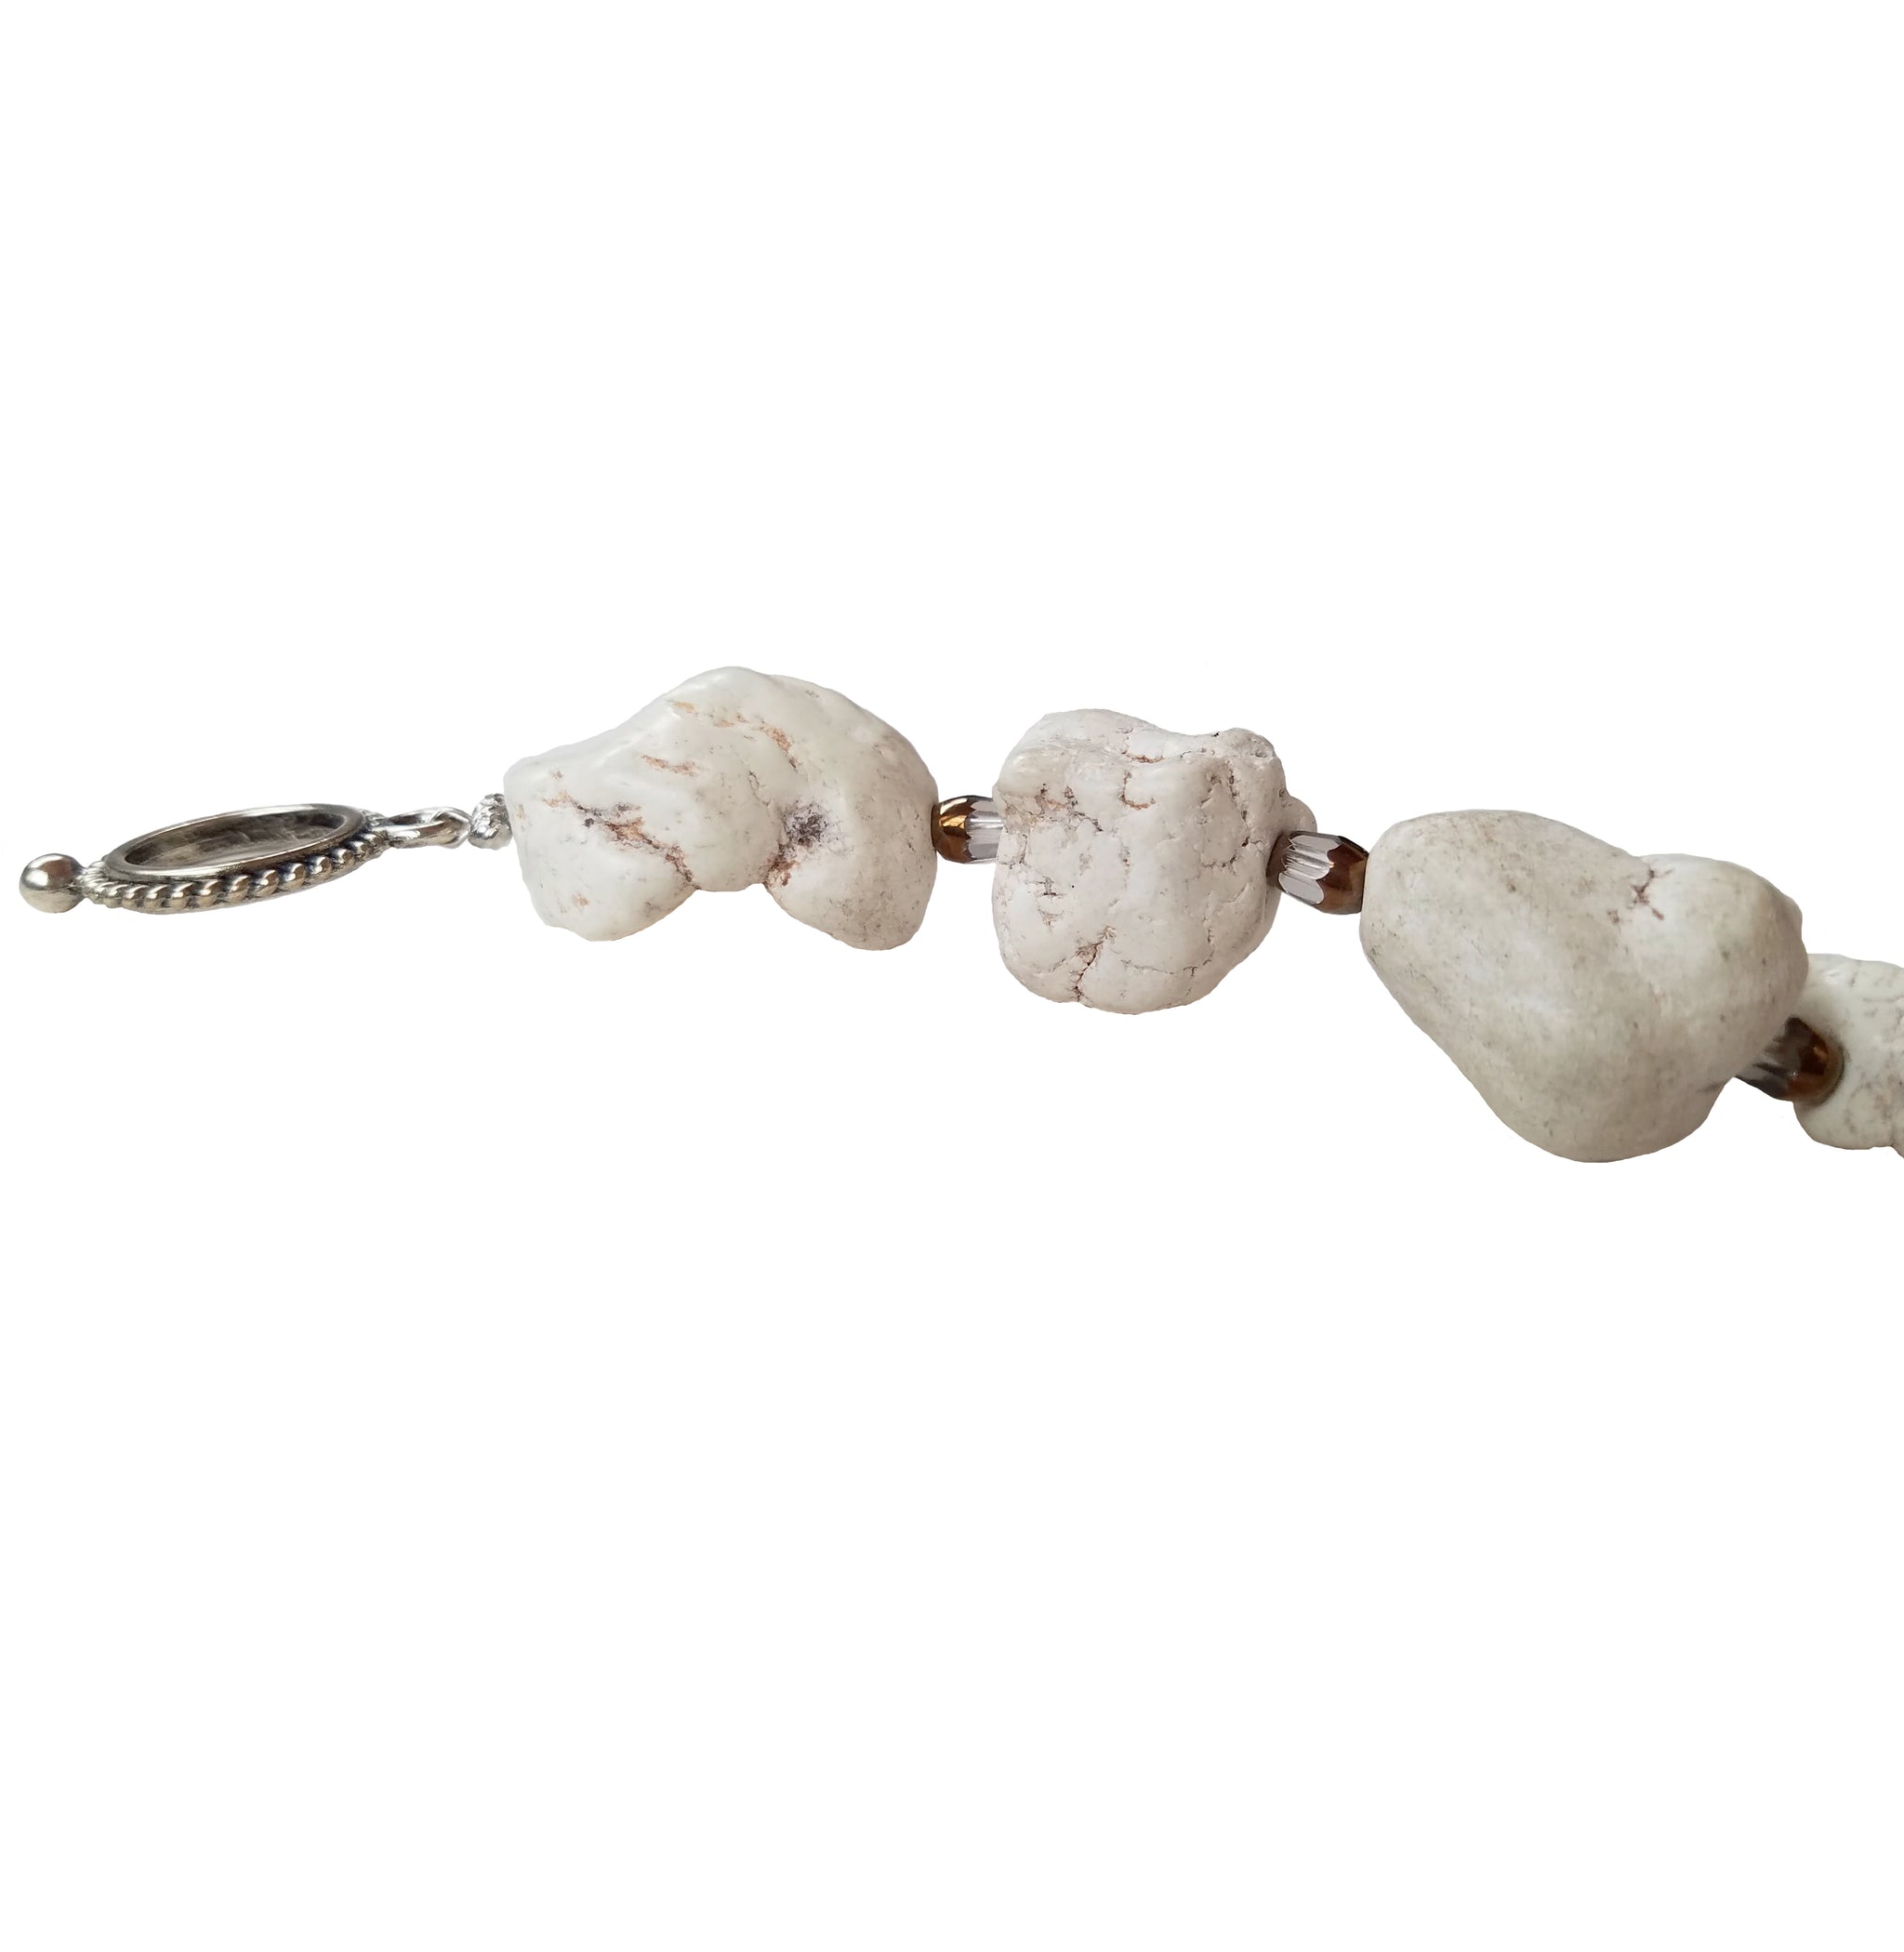 Moon Craters Large Stone Bracelet - Only 1!